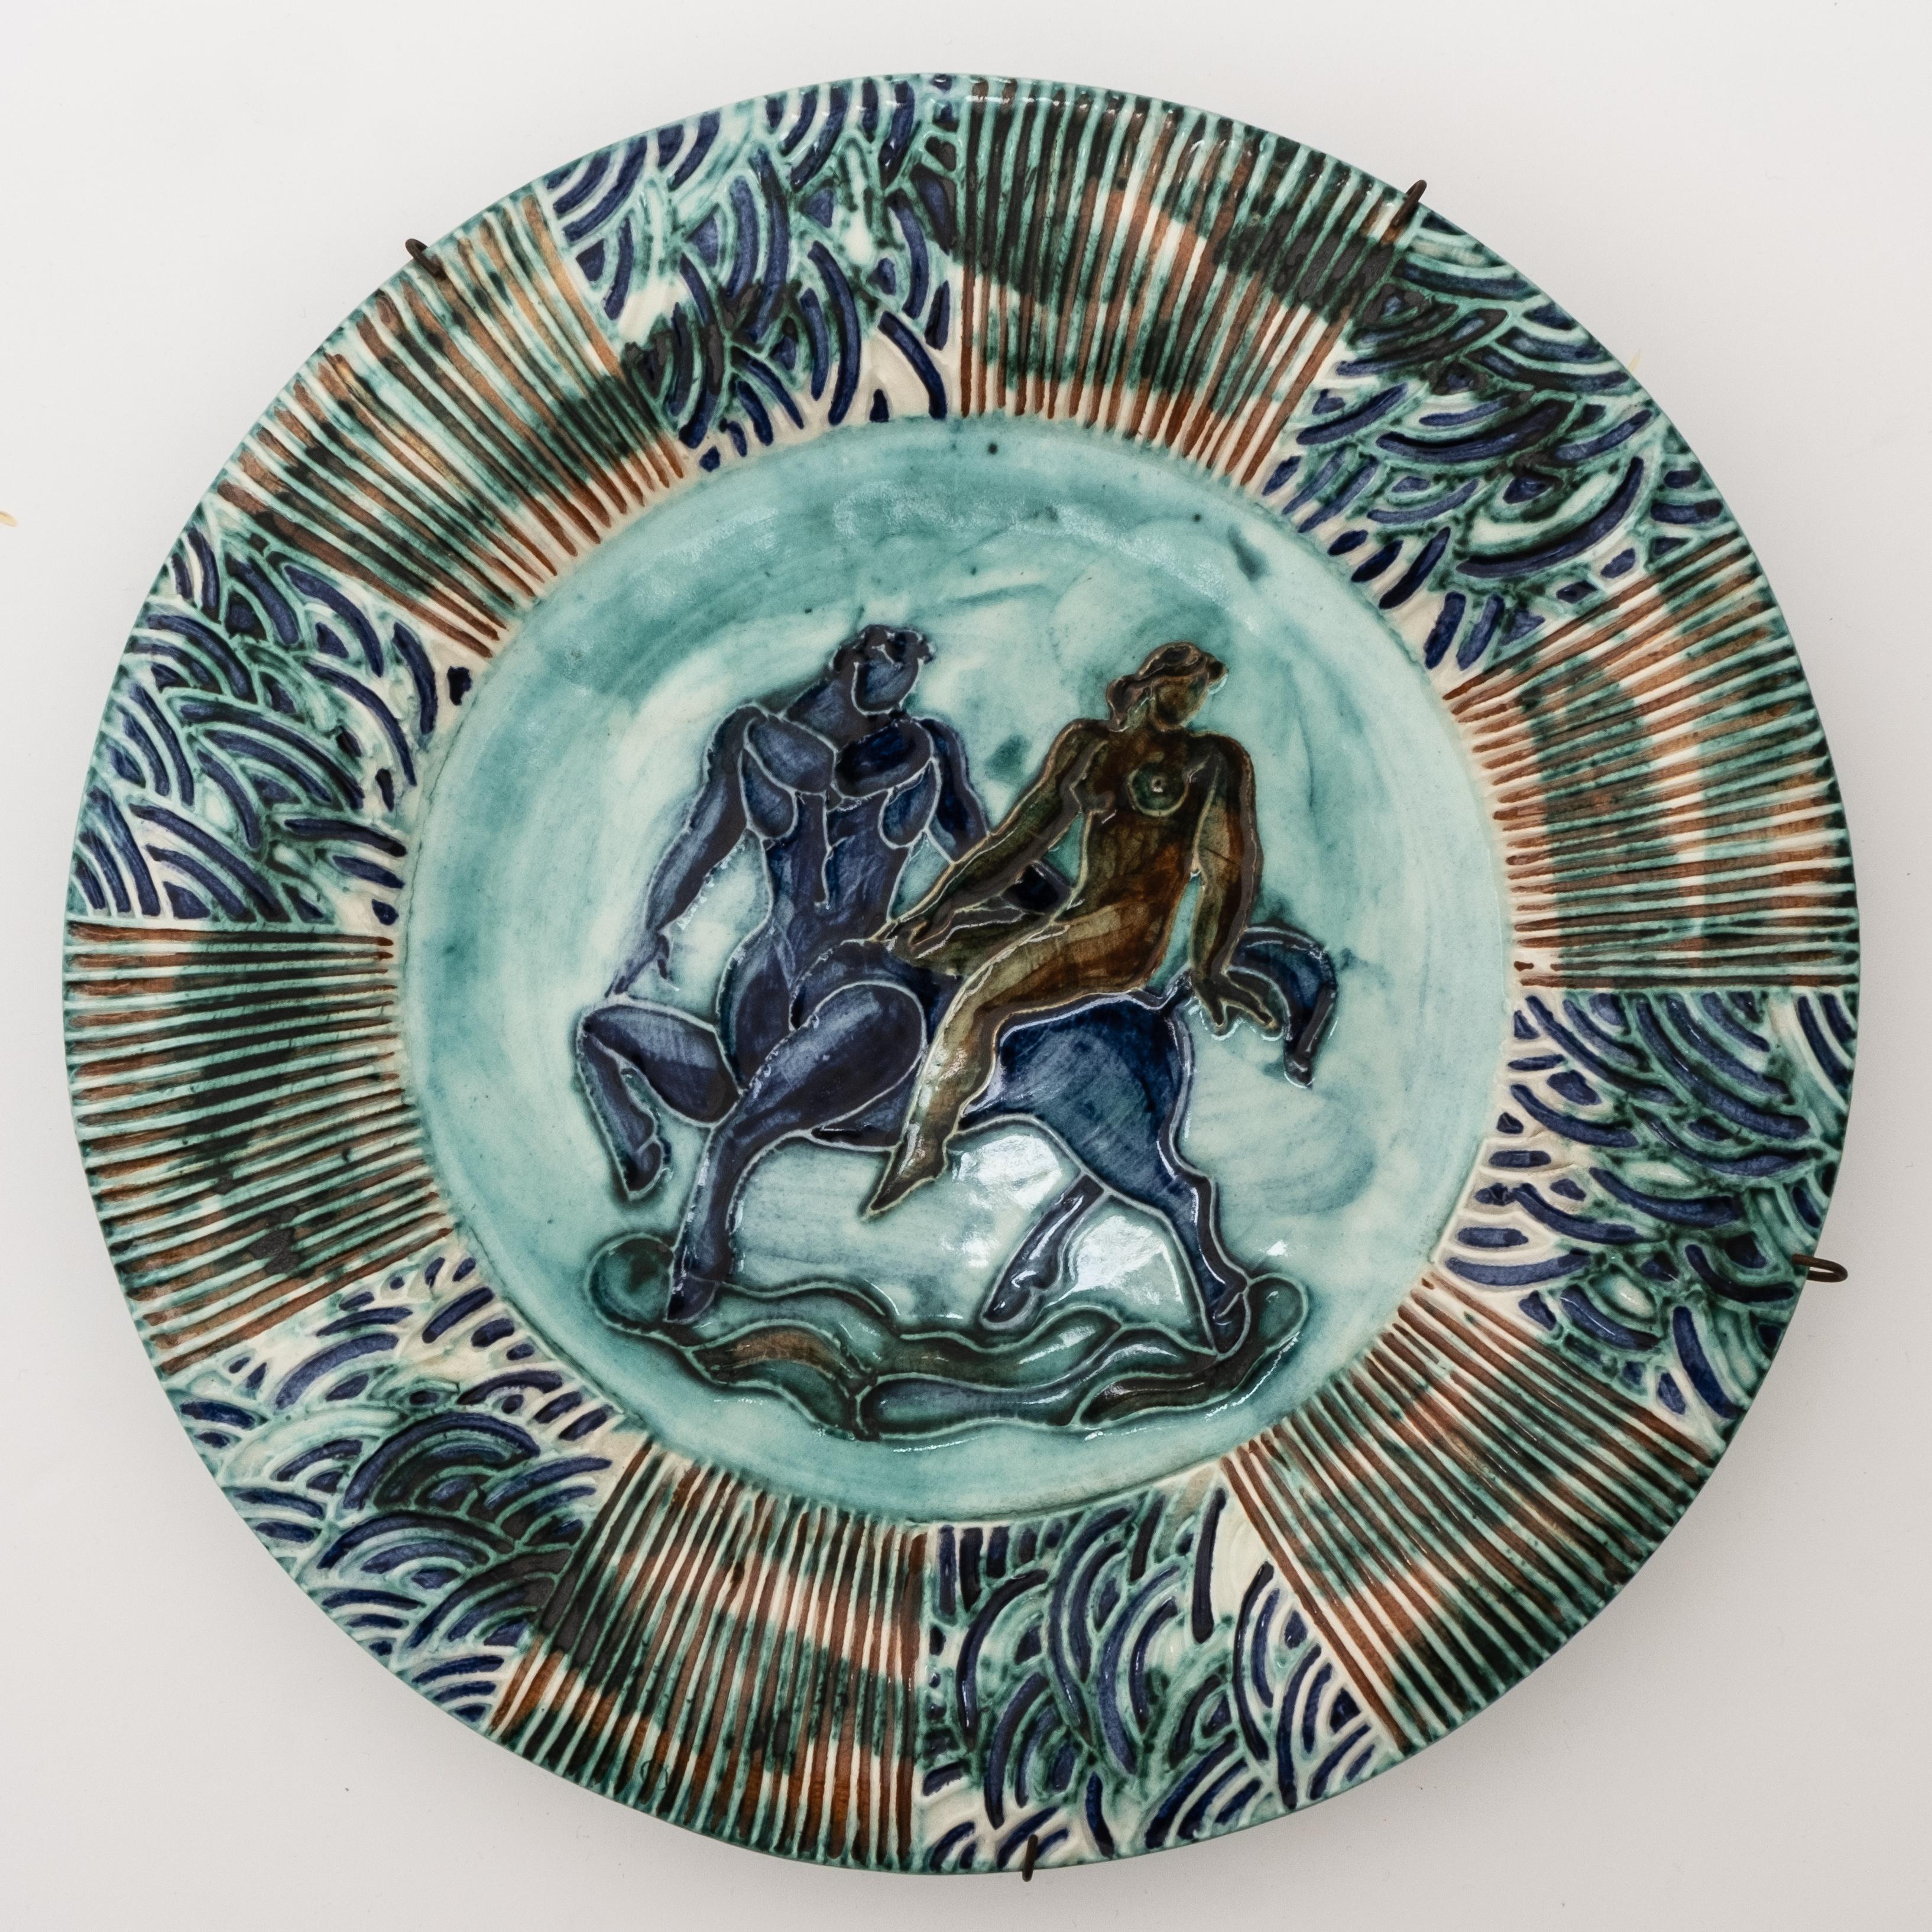 Art Deco Enameled Ceramic Plate, featuring a central figural scene with a centaur and nude woman, encircled by a textured and polychrome glazed border in hues of blue and green, signed 